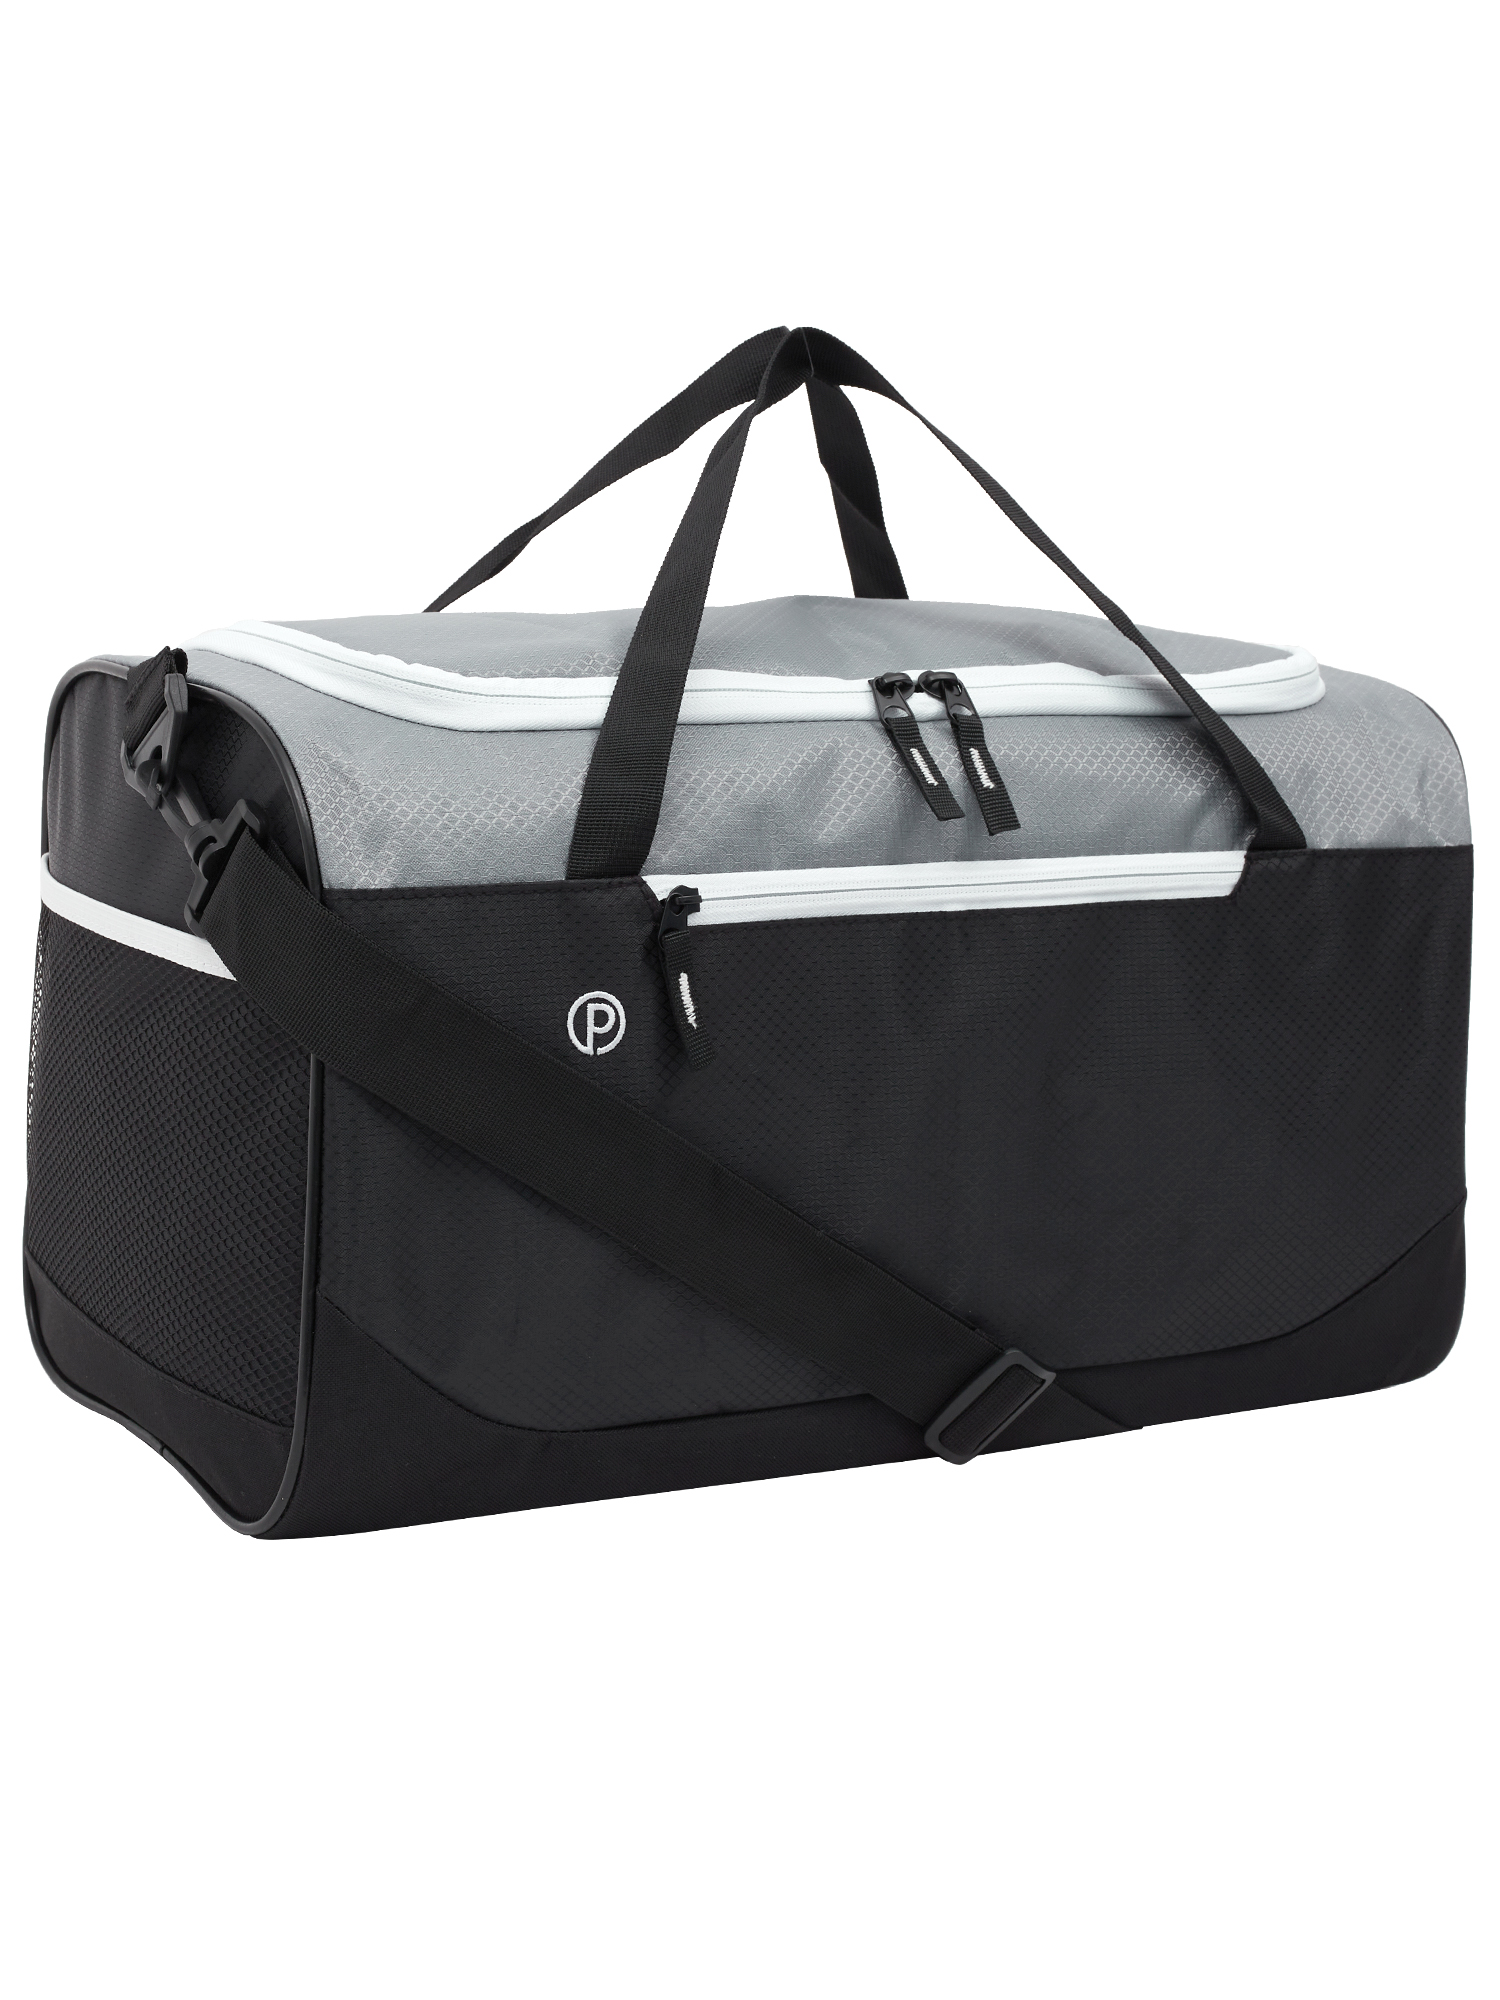 Protege 18" Polyester Sport Duffel - Black - image 2 of 10